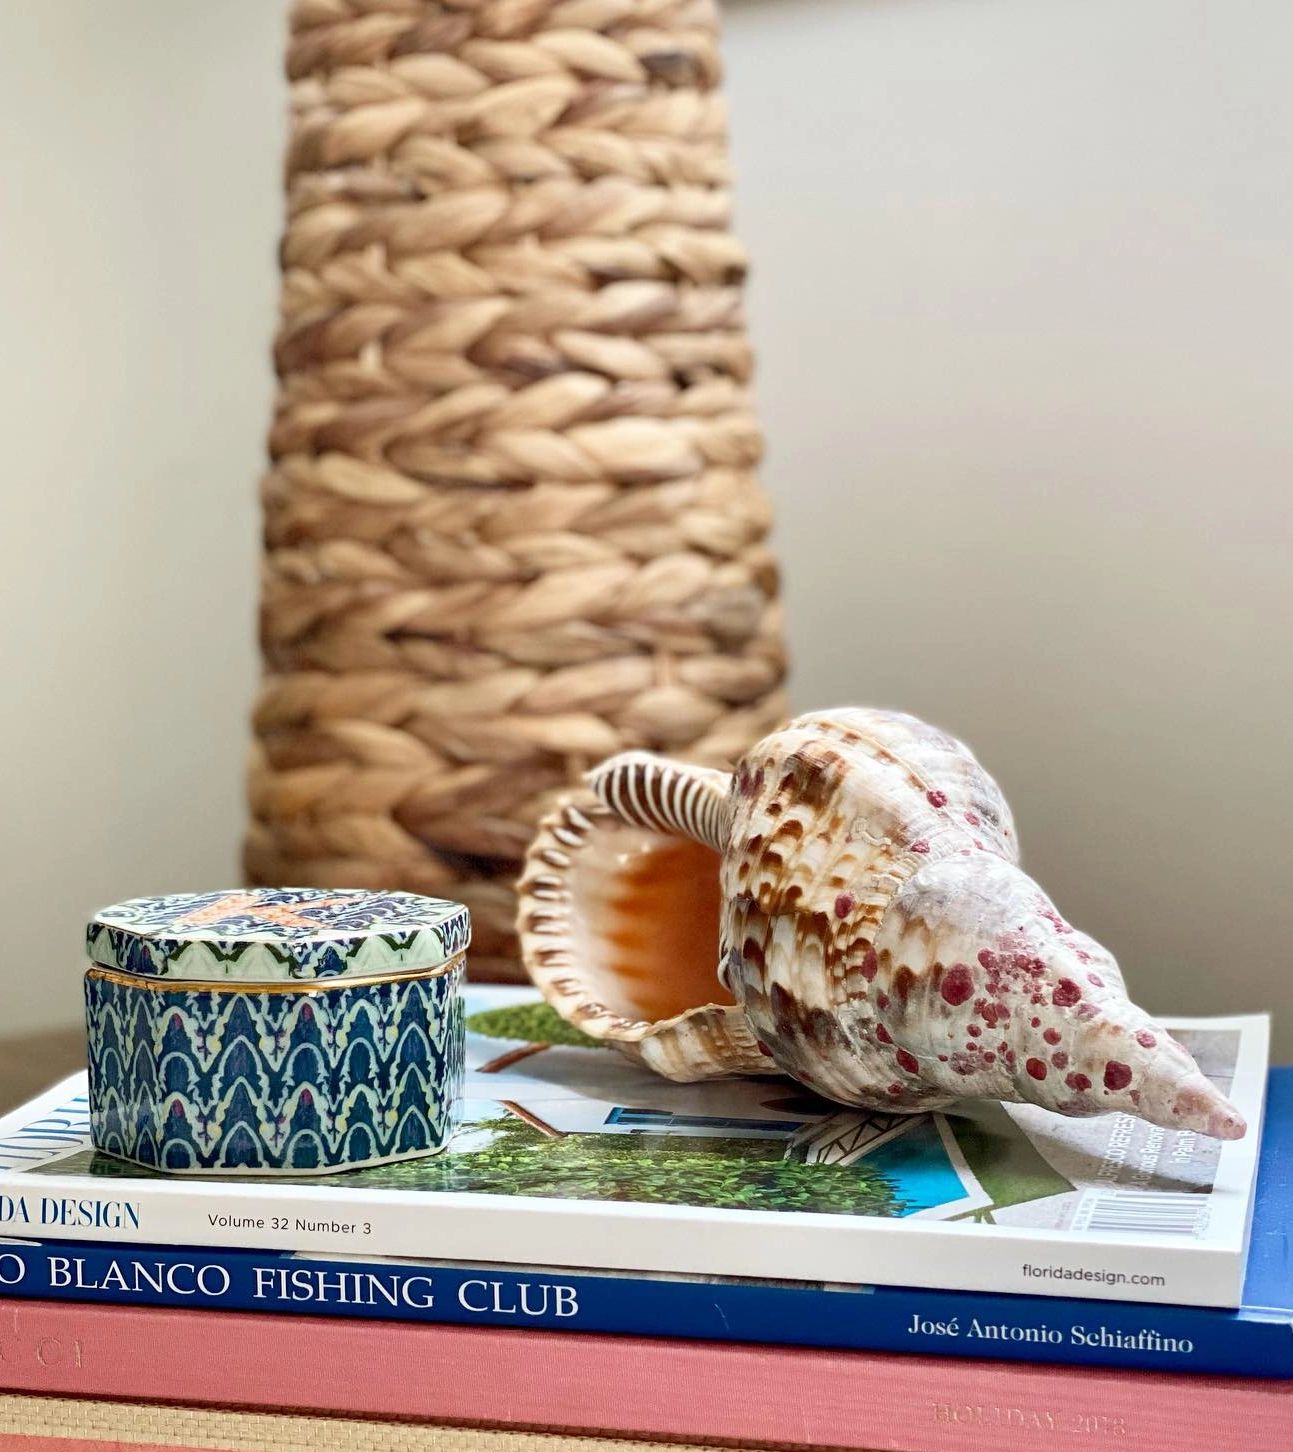 grasscloth lamps on nightstand seashell conch shell book stack amanda lindroth